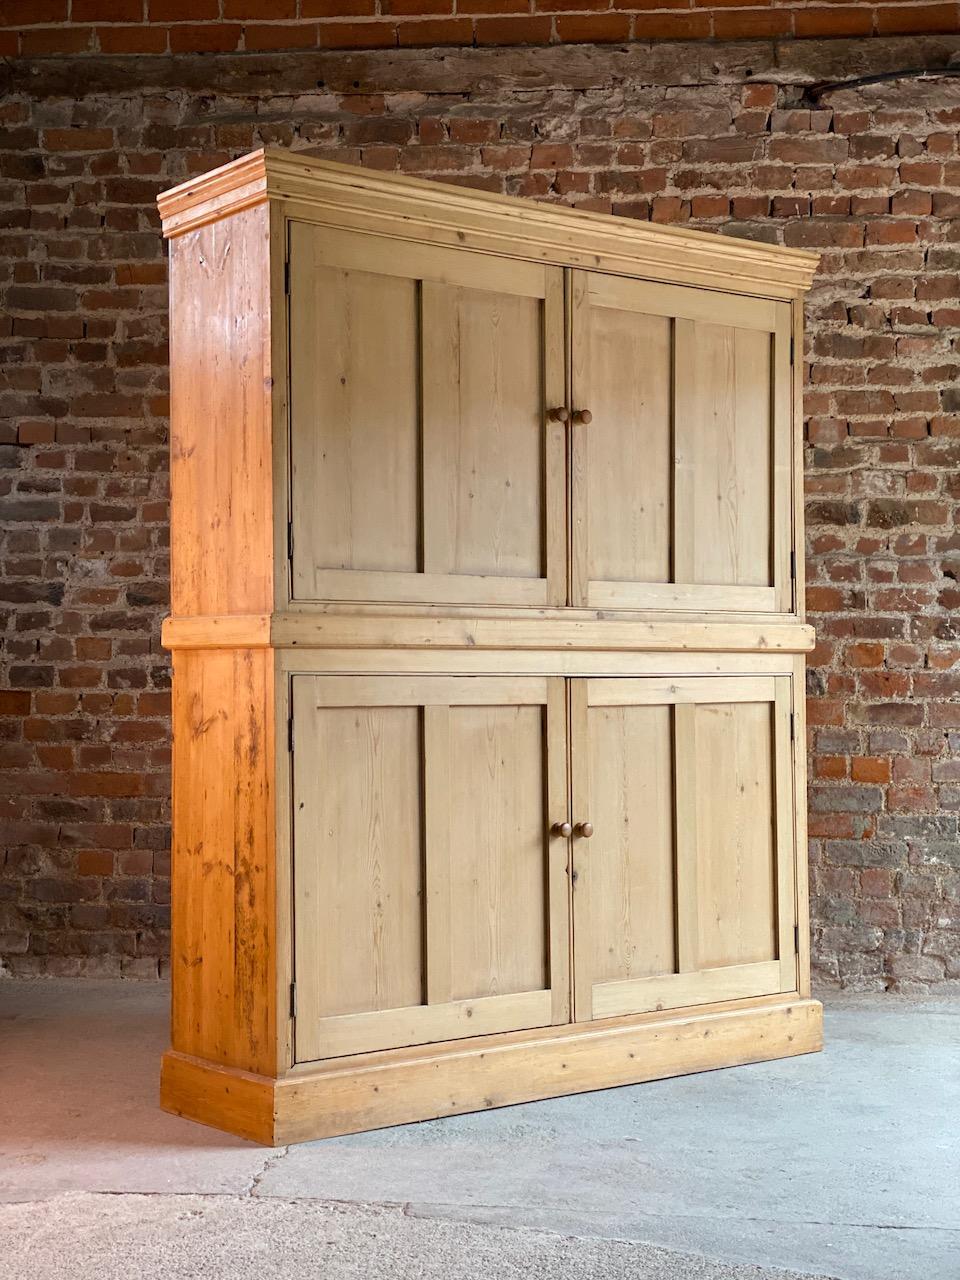 Antique pine school cupboard pantry, early 20th century

A magnificent early 20th century English solid pine school house cupboard, the rectangular corniced upper section over two paneled doors, the interior with shaped pelmet, divided in two